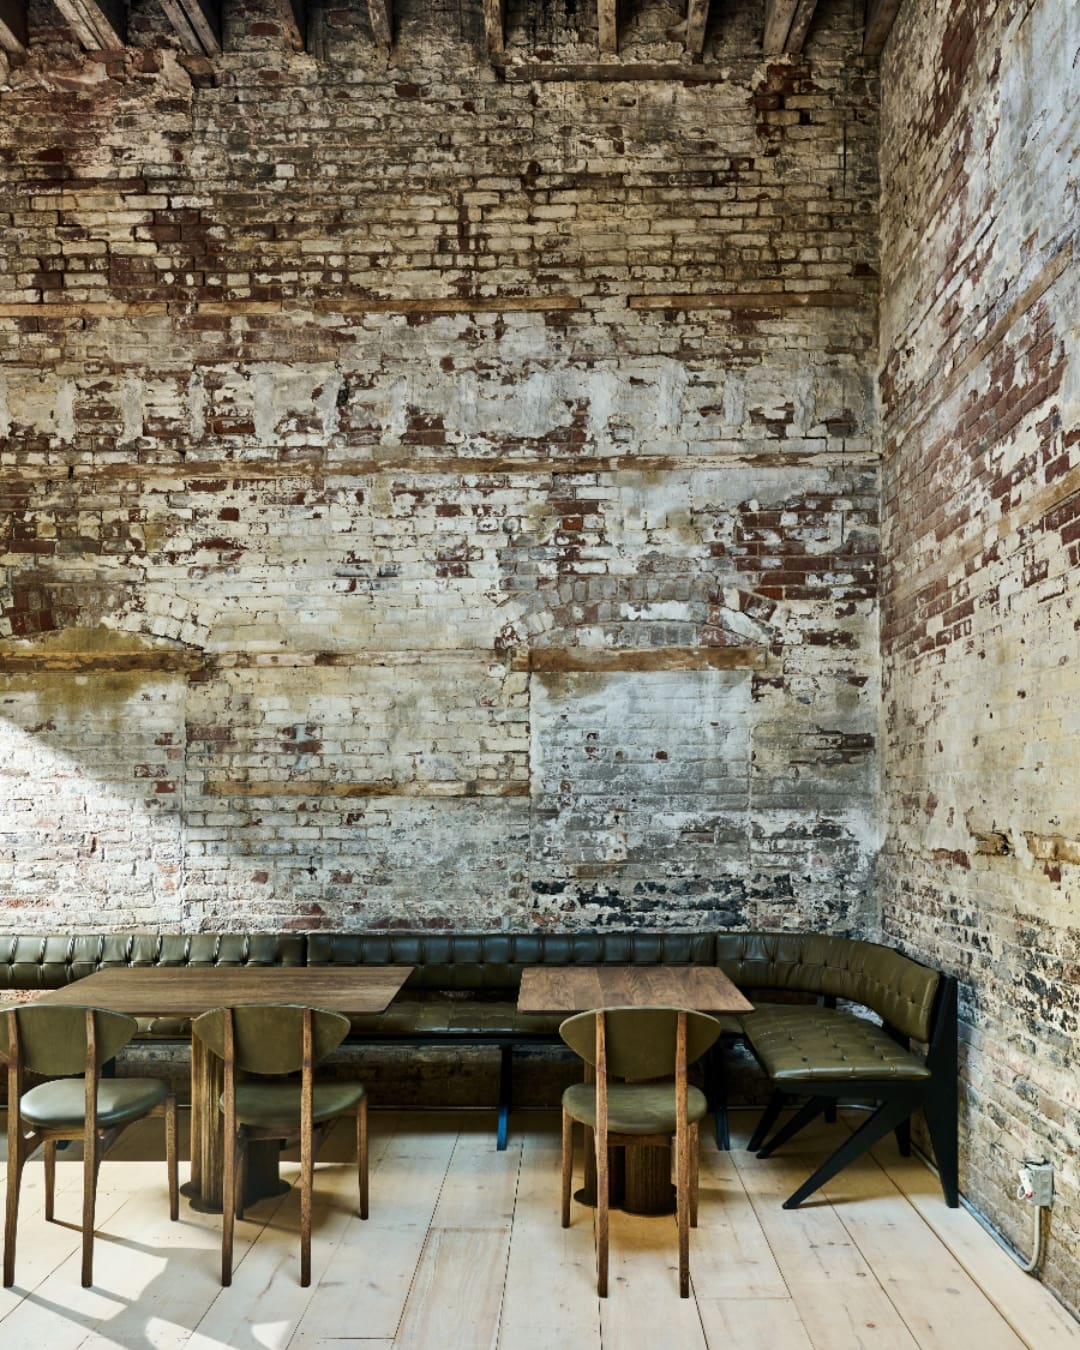 The industrial brick interiors at Ilis, a new restaurant from Mads Refslund